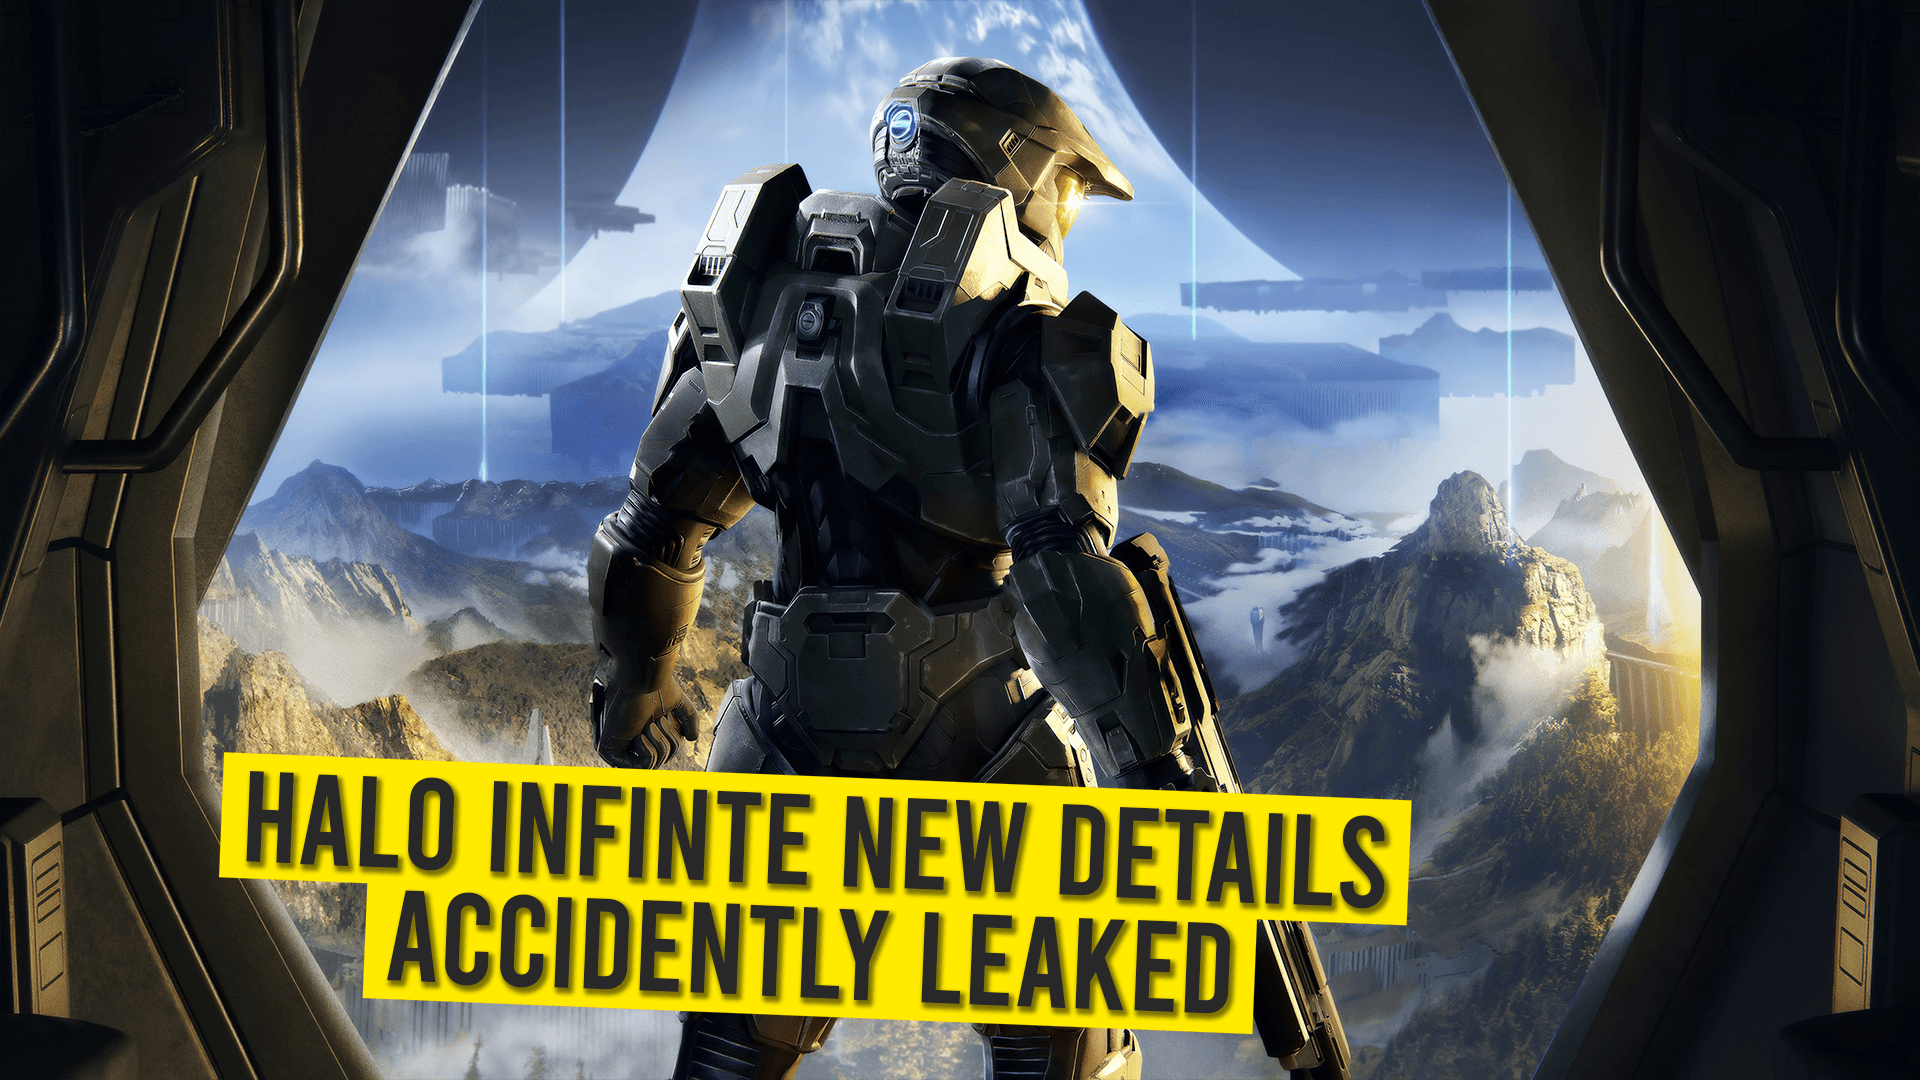 Halo Infinite New Details Accidently Leaked